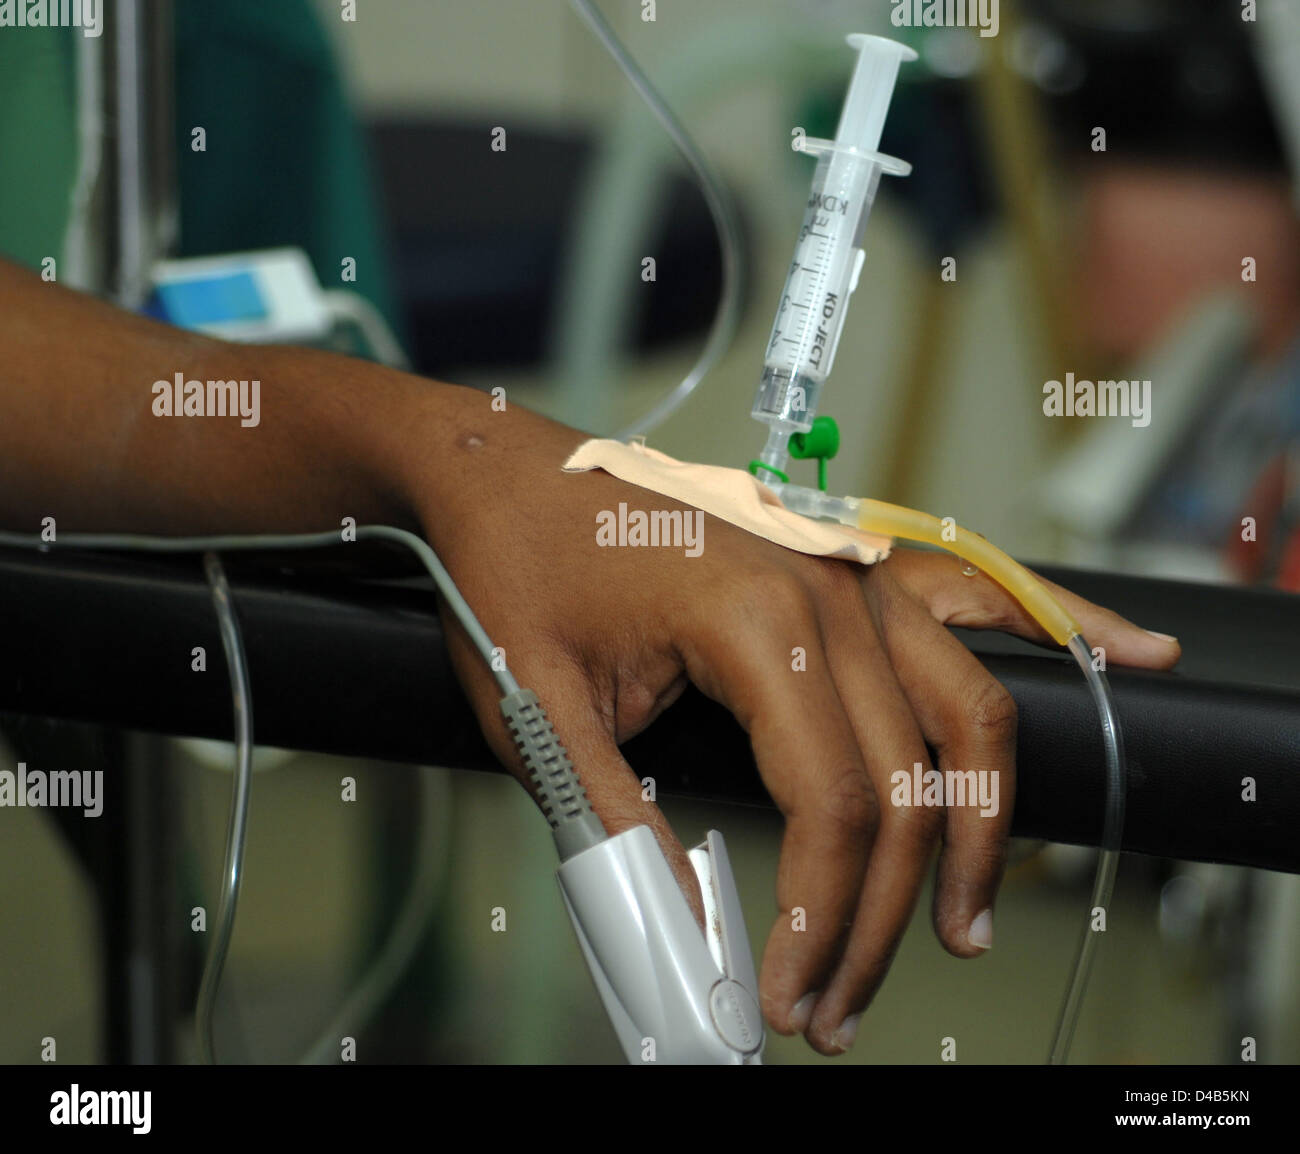 Close up of syringe inserted into catheter attached to patient's hand Stock Photo